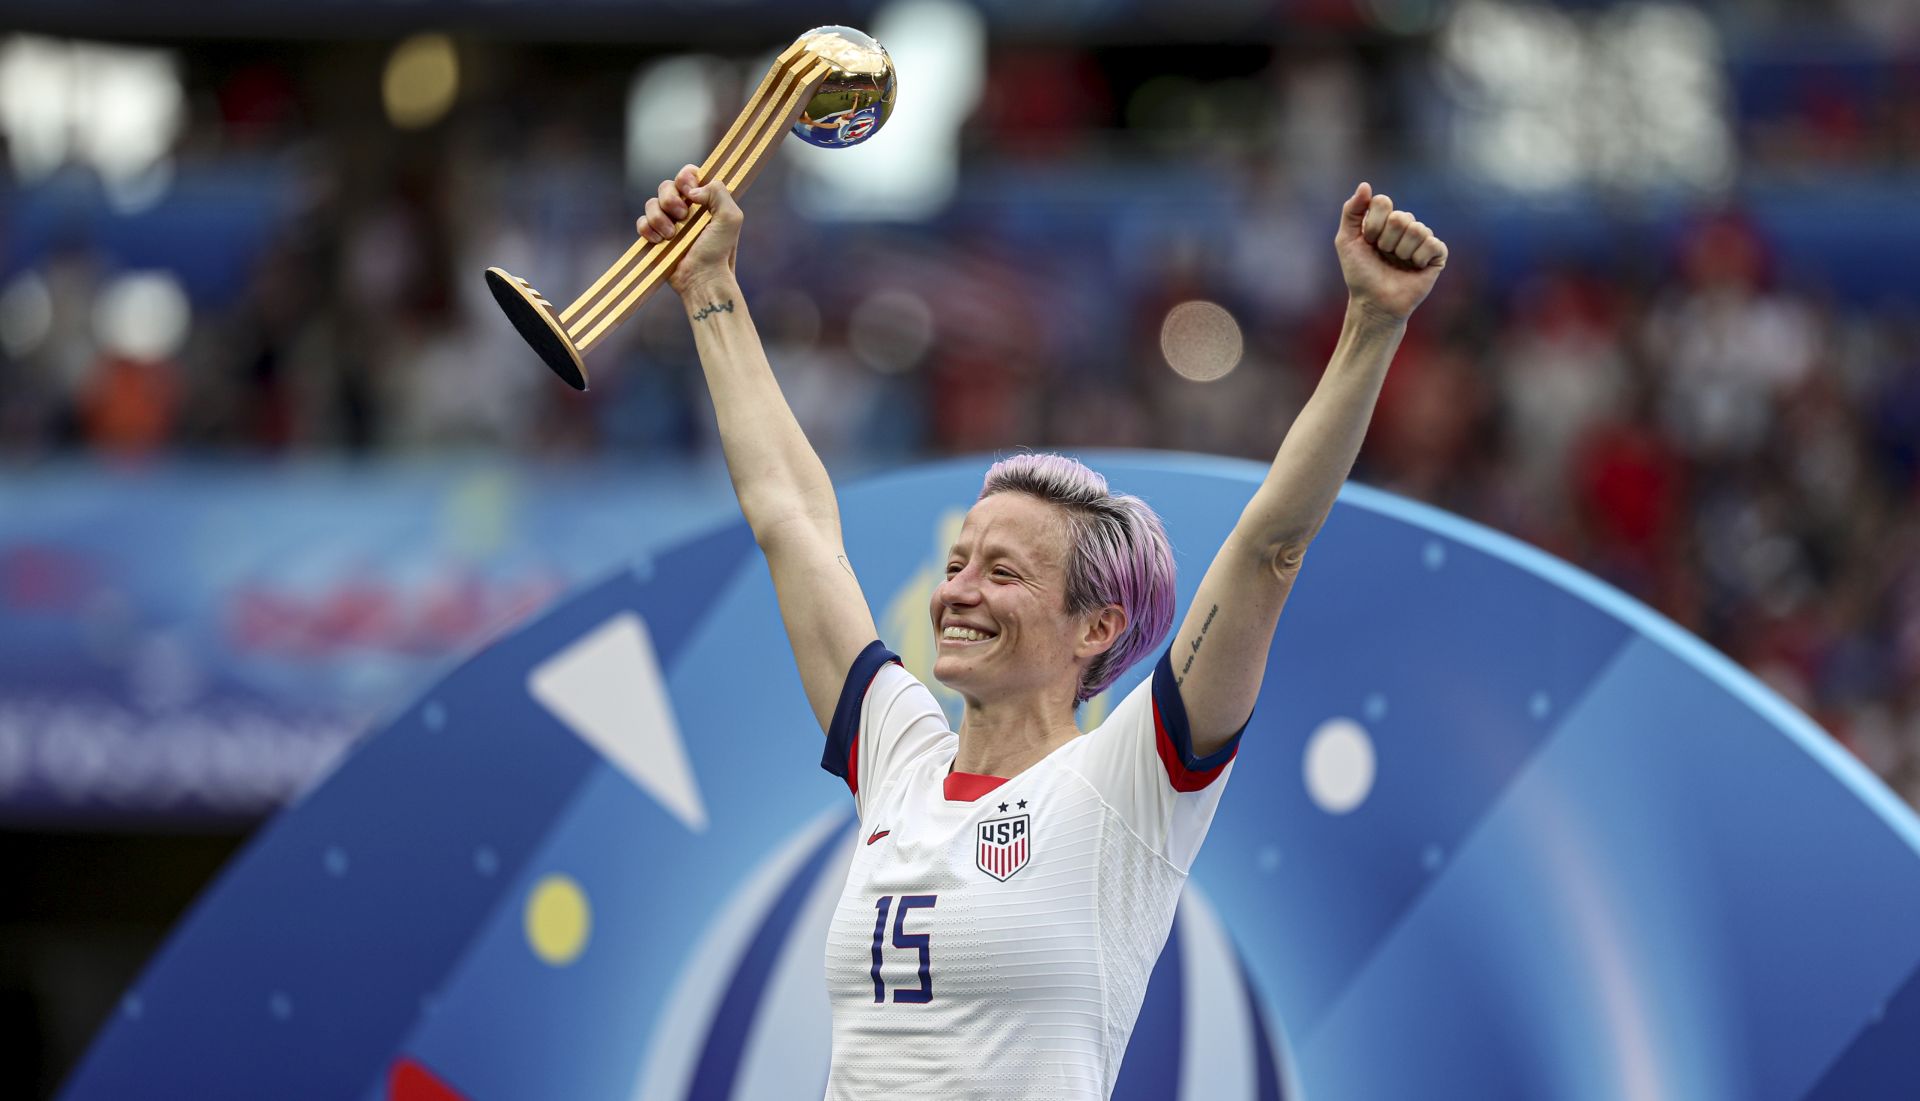 epa07701884 Megan Rapinoe of the USA poses for photographs during the ceremony of the FIFA Women's World Cup 2019 final soccer match between USA and Netherlands in Lyon, France, 07 July 2019.  EPA/SRDJAN SUKI